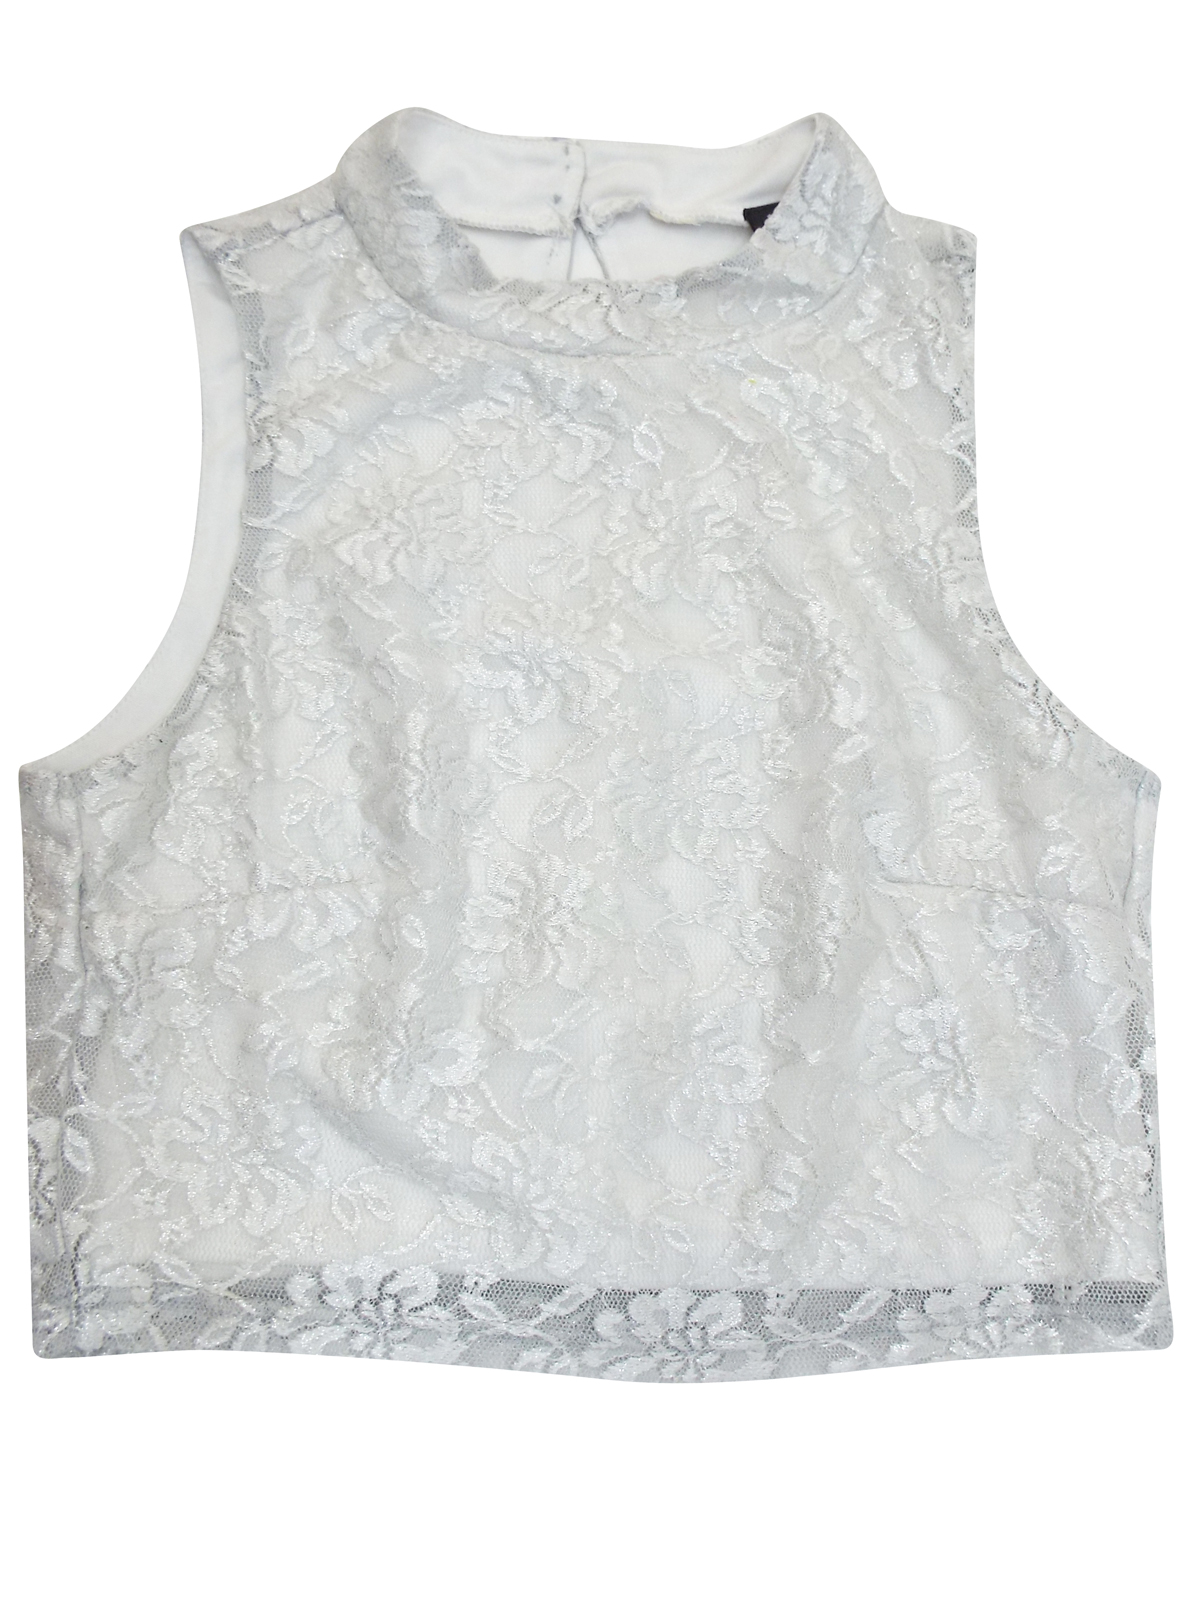 Miss Selfridge - - SILVER Lace High Neck Crop Top - Size 6 to 8